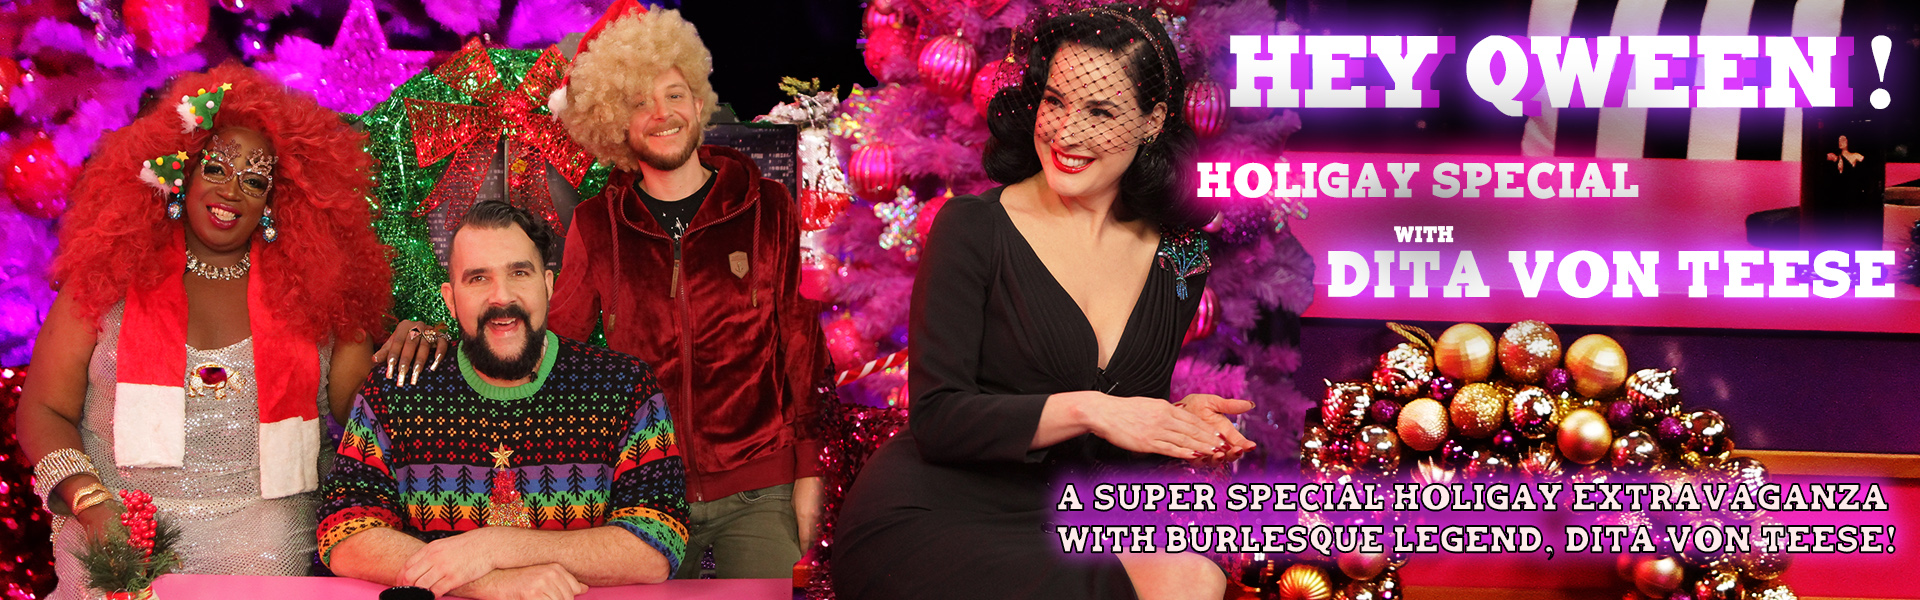 Hey Qween! Holiday Special with Dita Von teese